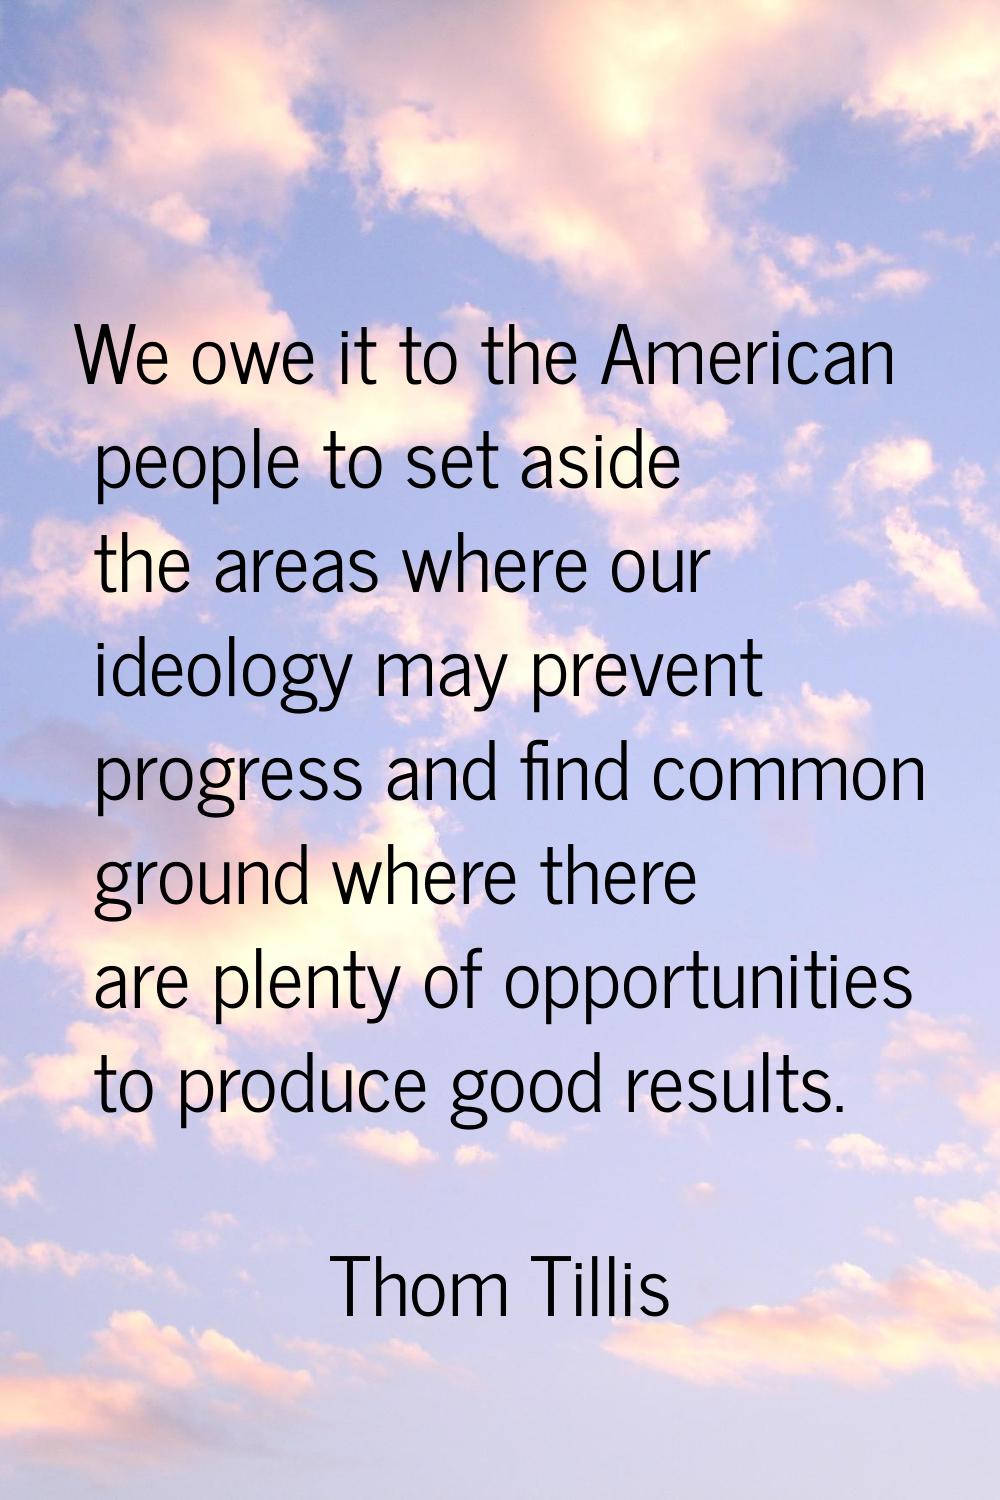 We owe it to the American people to set aside the areas where our ideology may prevent progress and